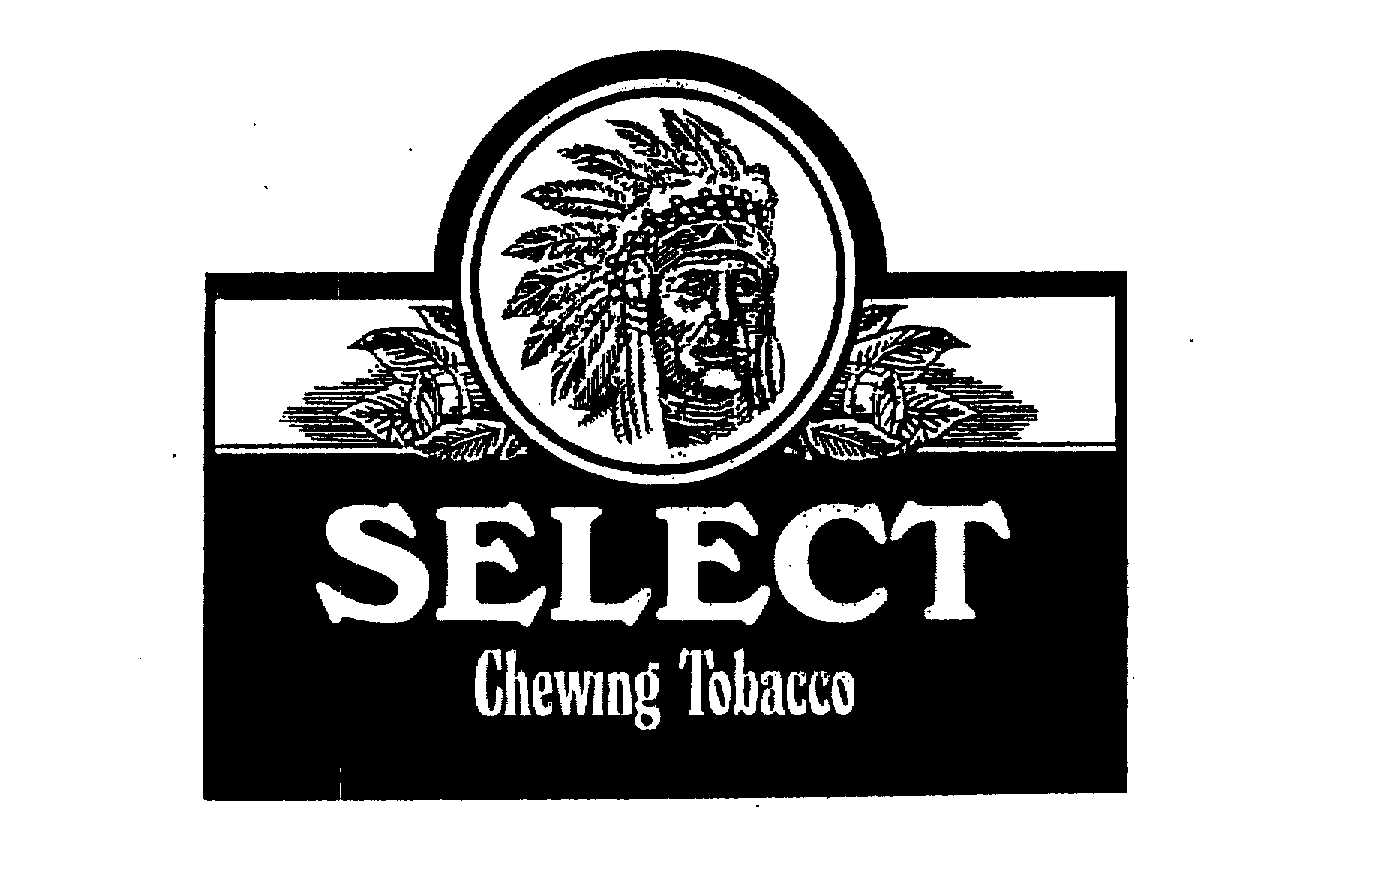  SELECT CHEWING TOBACCO